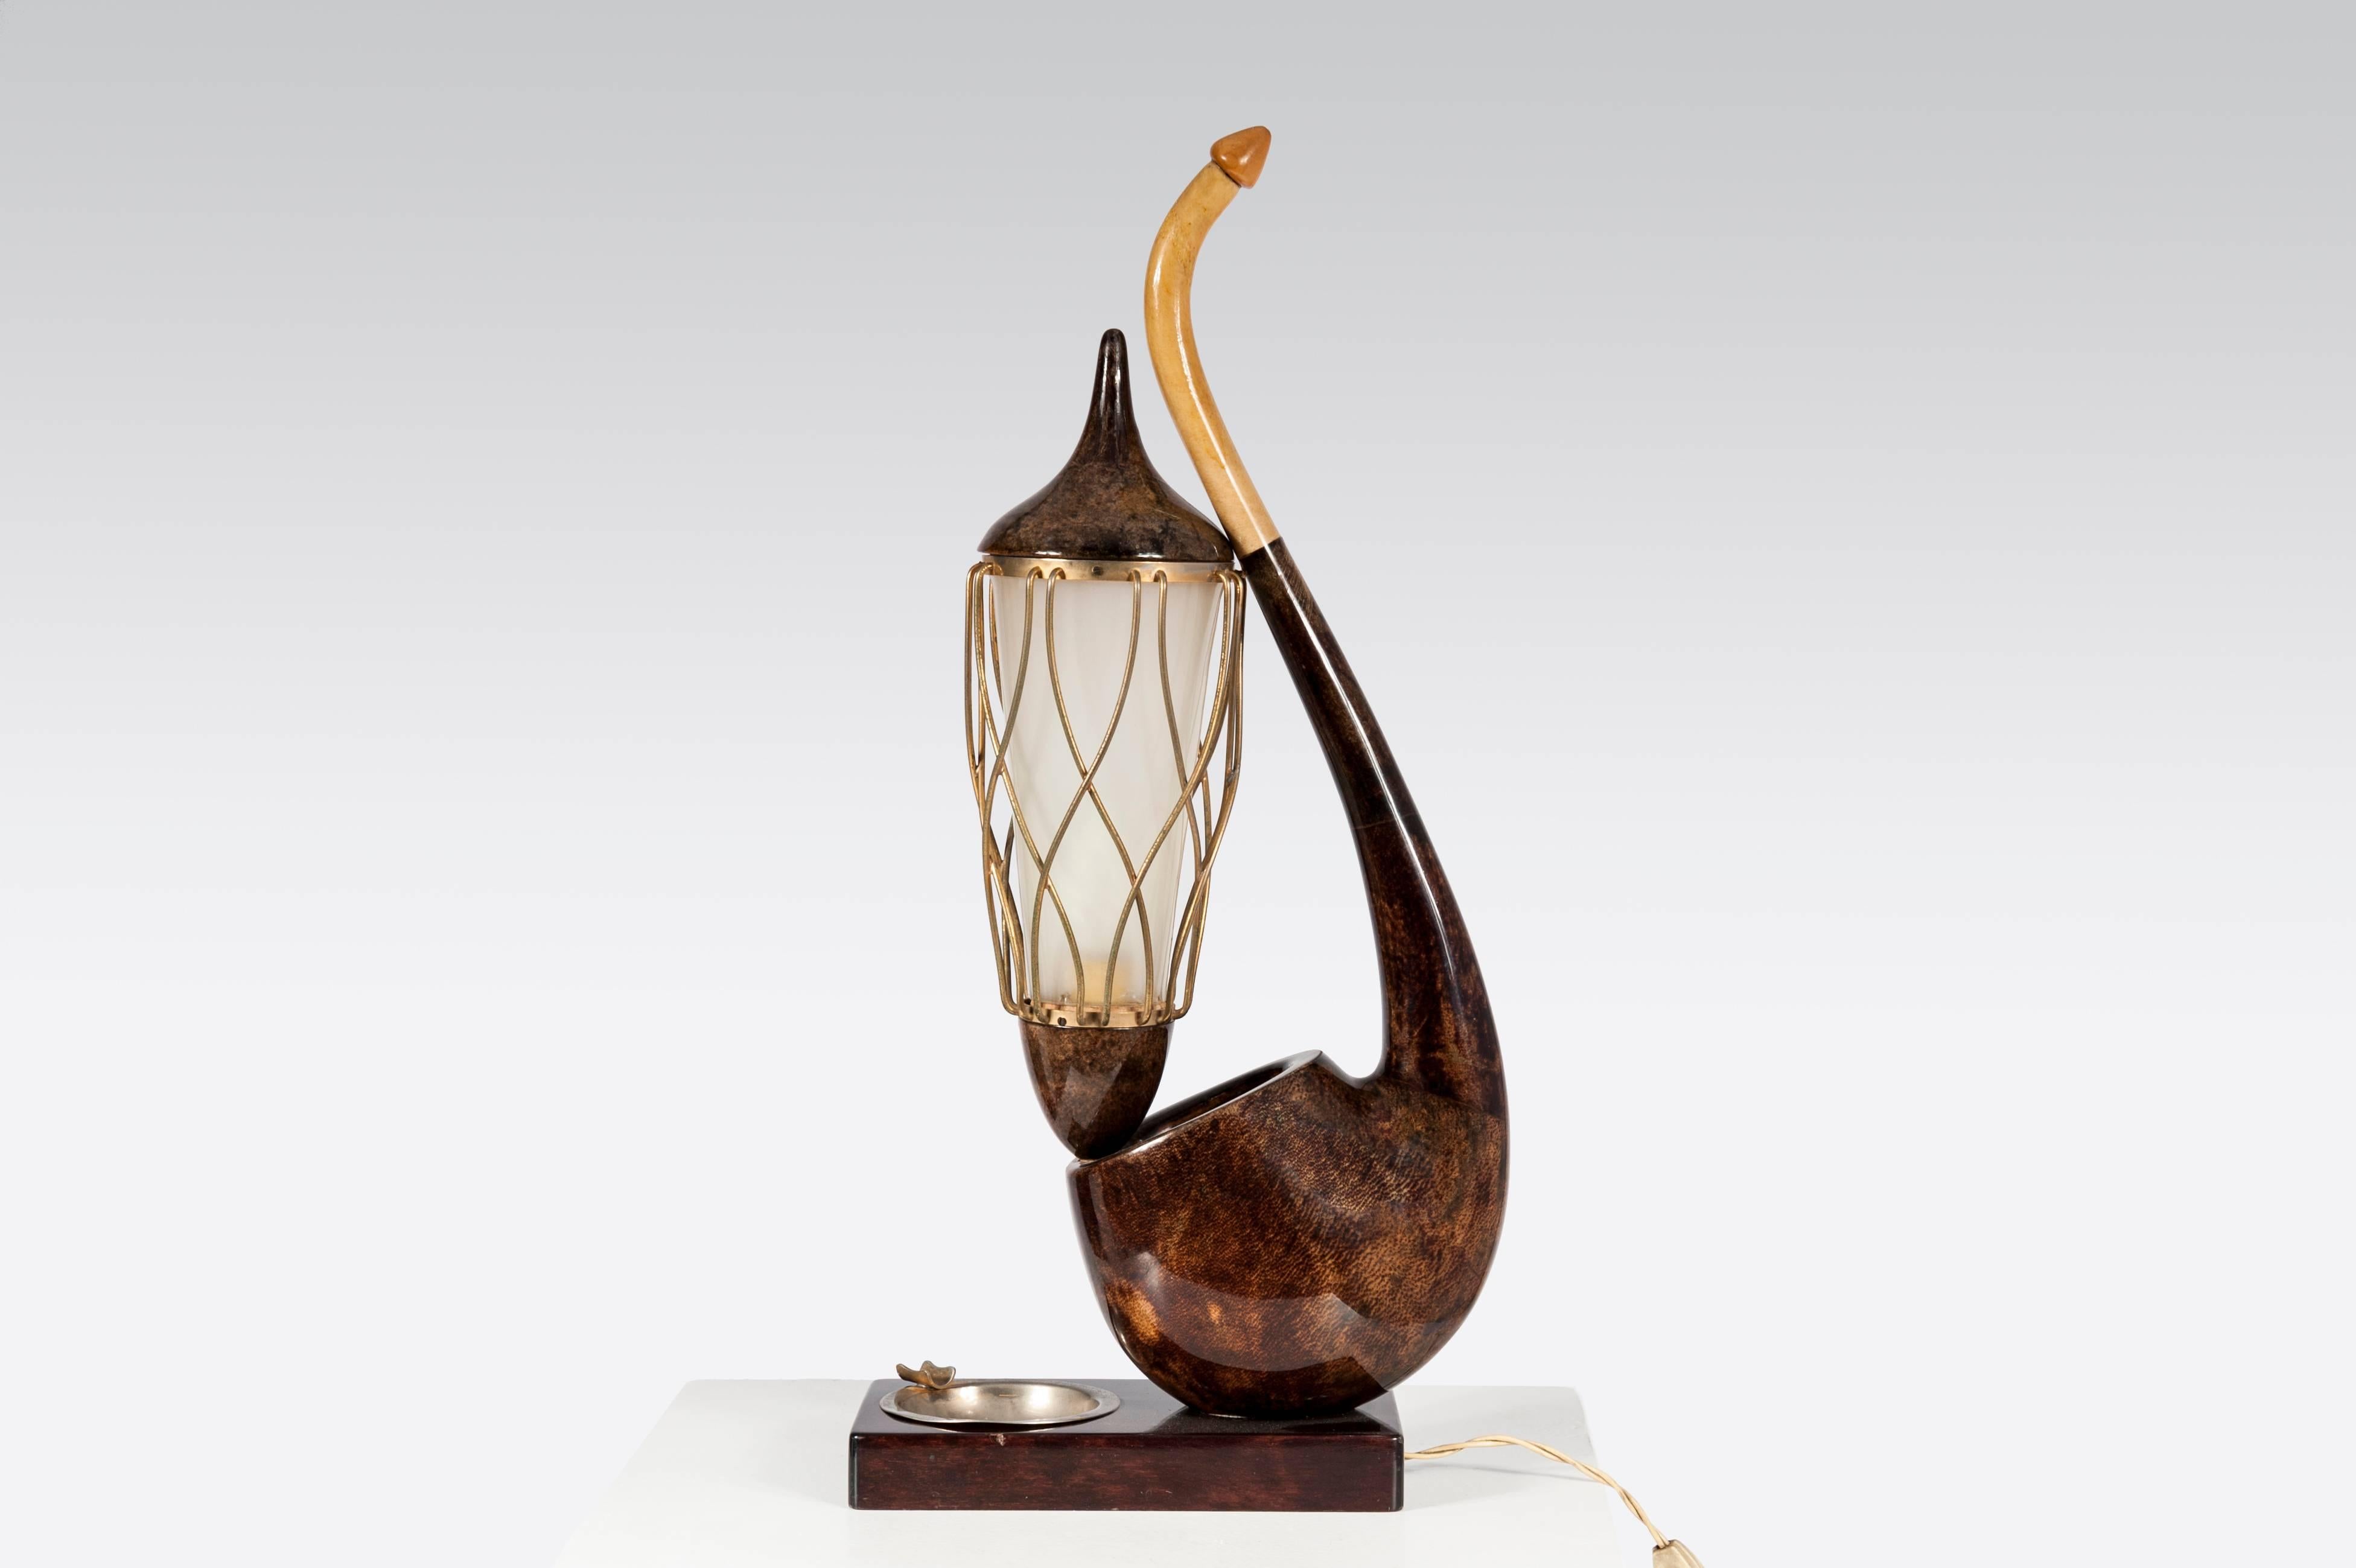 This table lamp was designed in by Aldo Tura and was produced in Milan, circa 1960. It is made from brown lacquered with the handle and cage in gilt brass. The lampshade is made from plastic and it's in original and very good vintage condition.